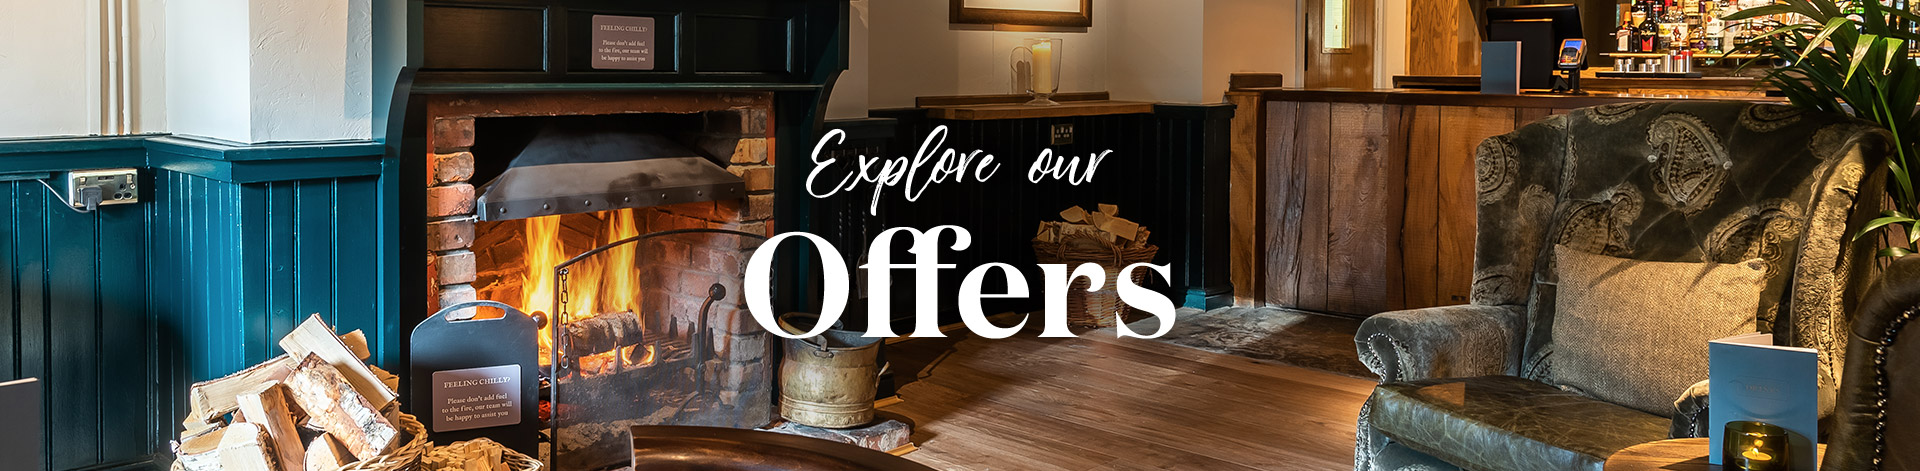 Our latest offers at The Stretton Fox